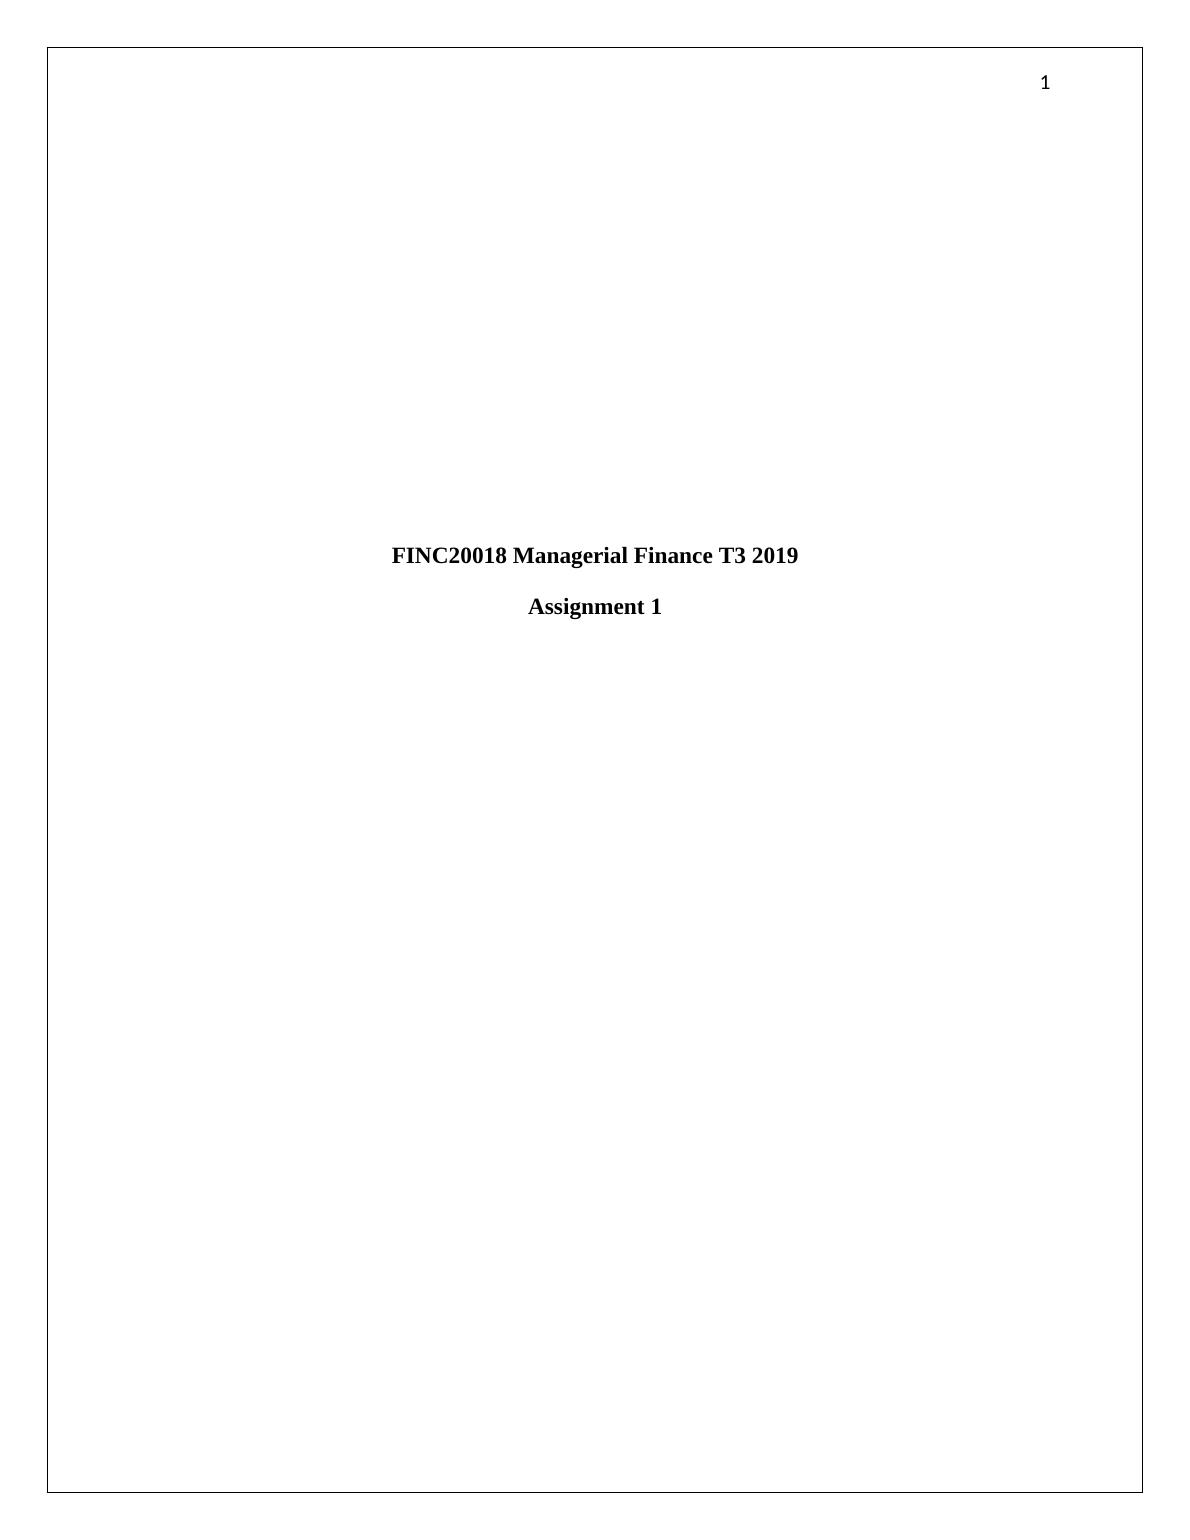 FINC20018 | Managerial Finance T3 2019 | Assignment 1_1